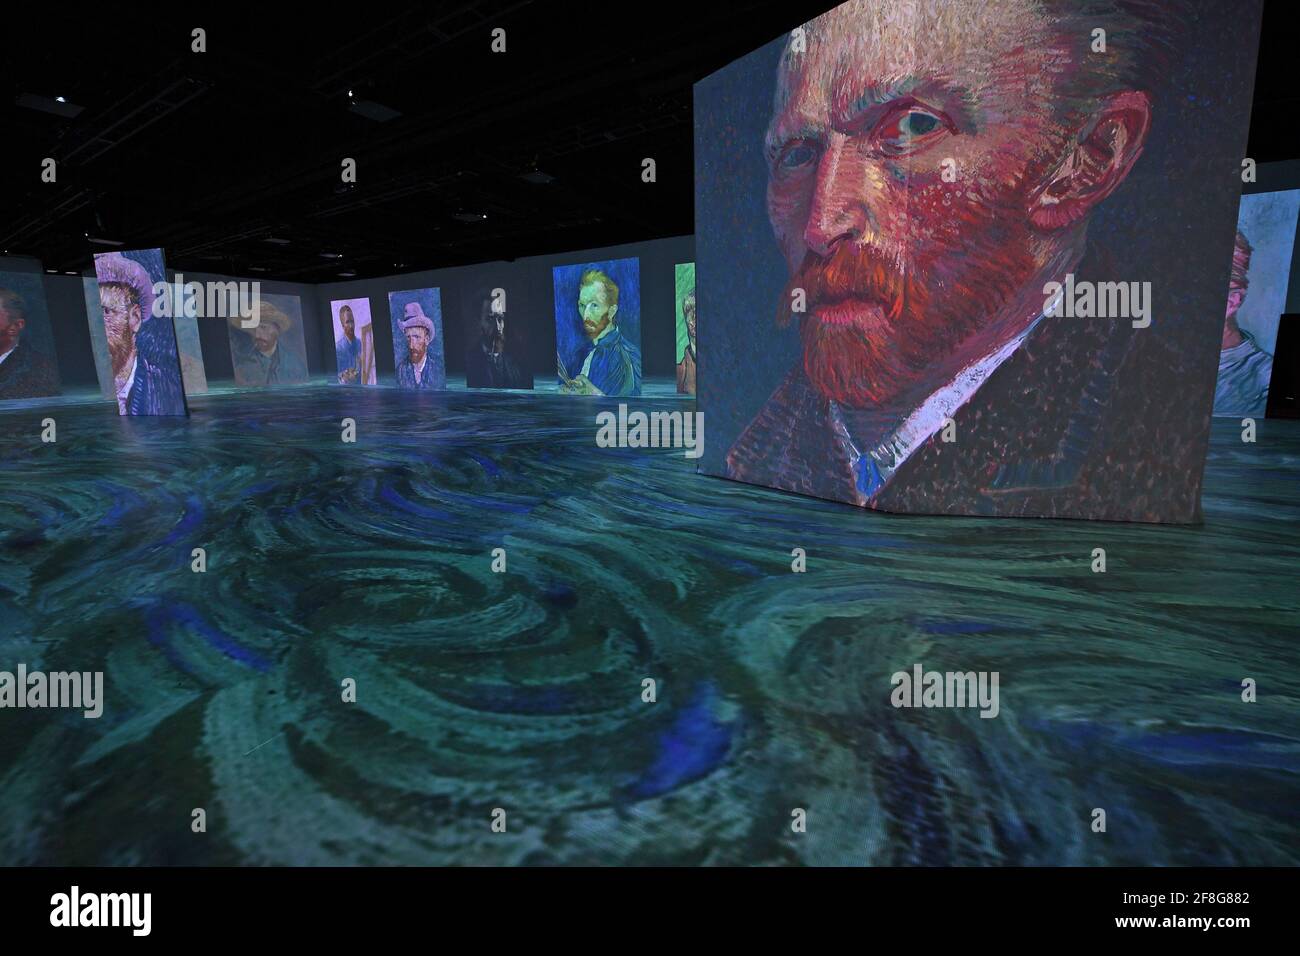 Miami, FL, USA. 13th Apr, 2021. People attend the Beyond Van Gogh exhibit, Beyond Van Gogh is a rich and unique multimedia experience, taking the viewer on a journey through over 300 iconic artworks held at the Ice Palace on April 13, 2021 in Miami Florida. Credit: Mpi04/Media Punch/Alamy Live News Stock Photo